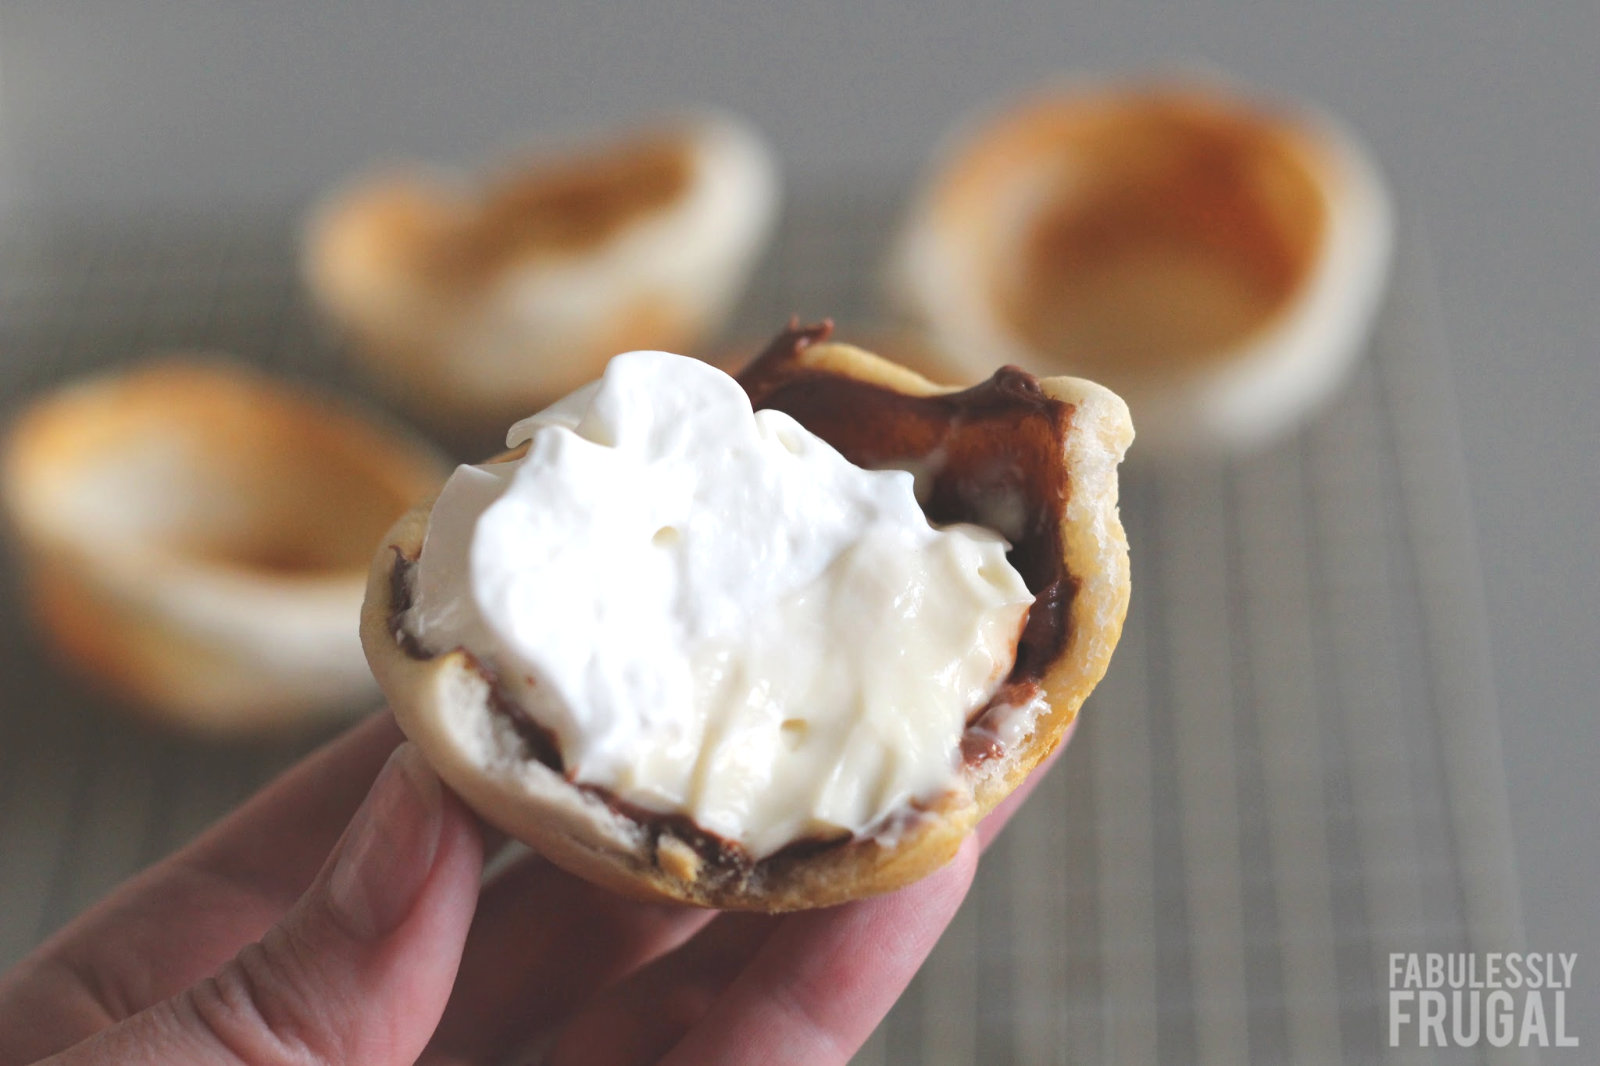 Oven baked eclair biscuit cup with chocolate pudding and whipped cream